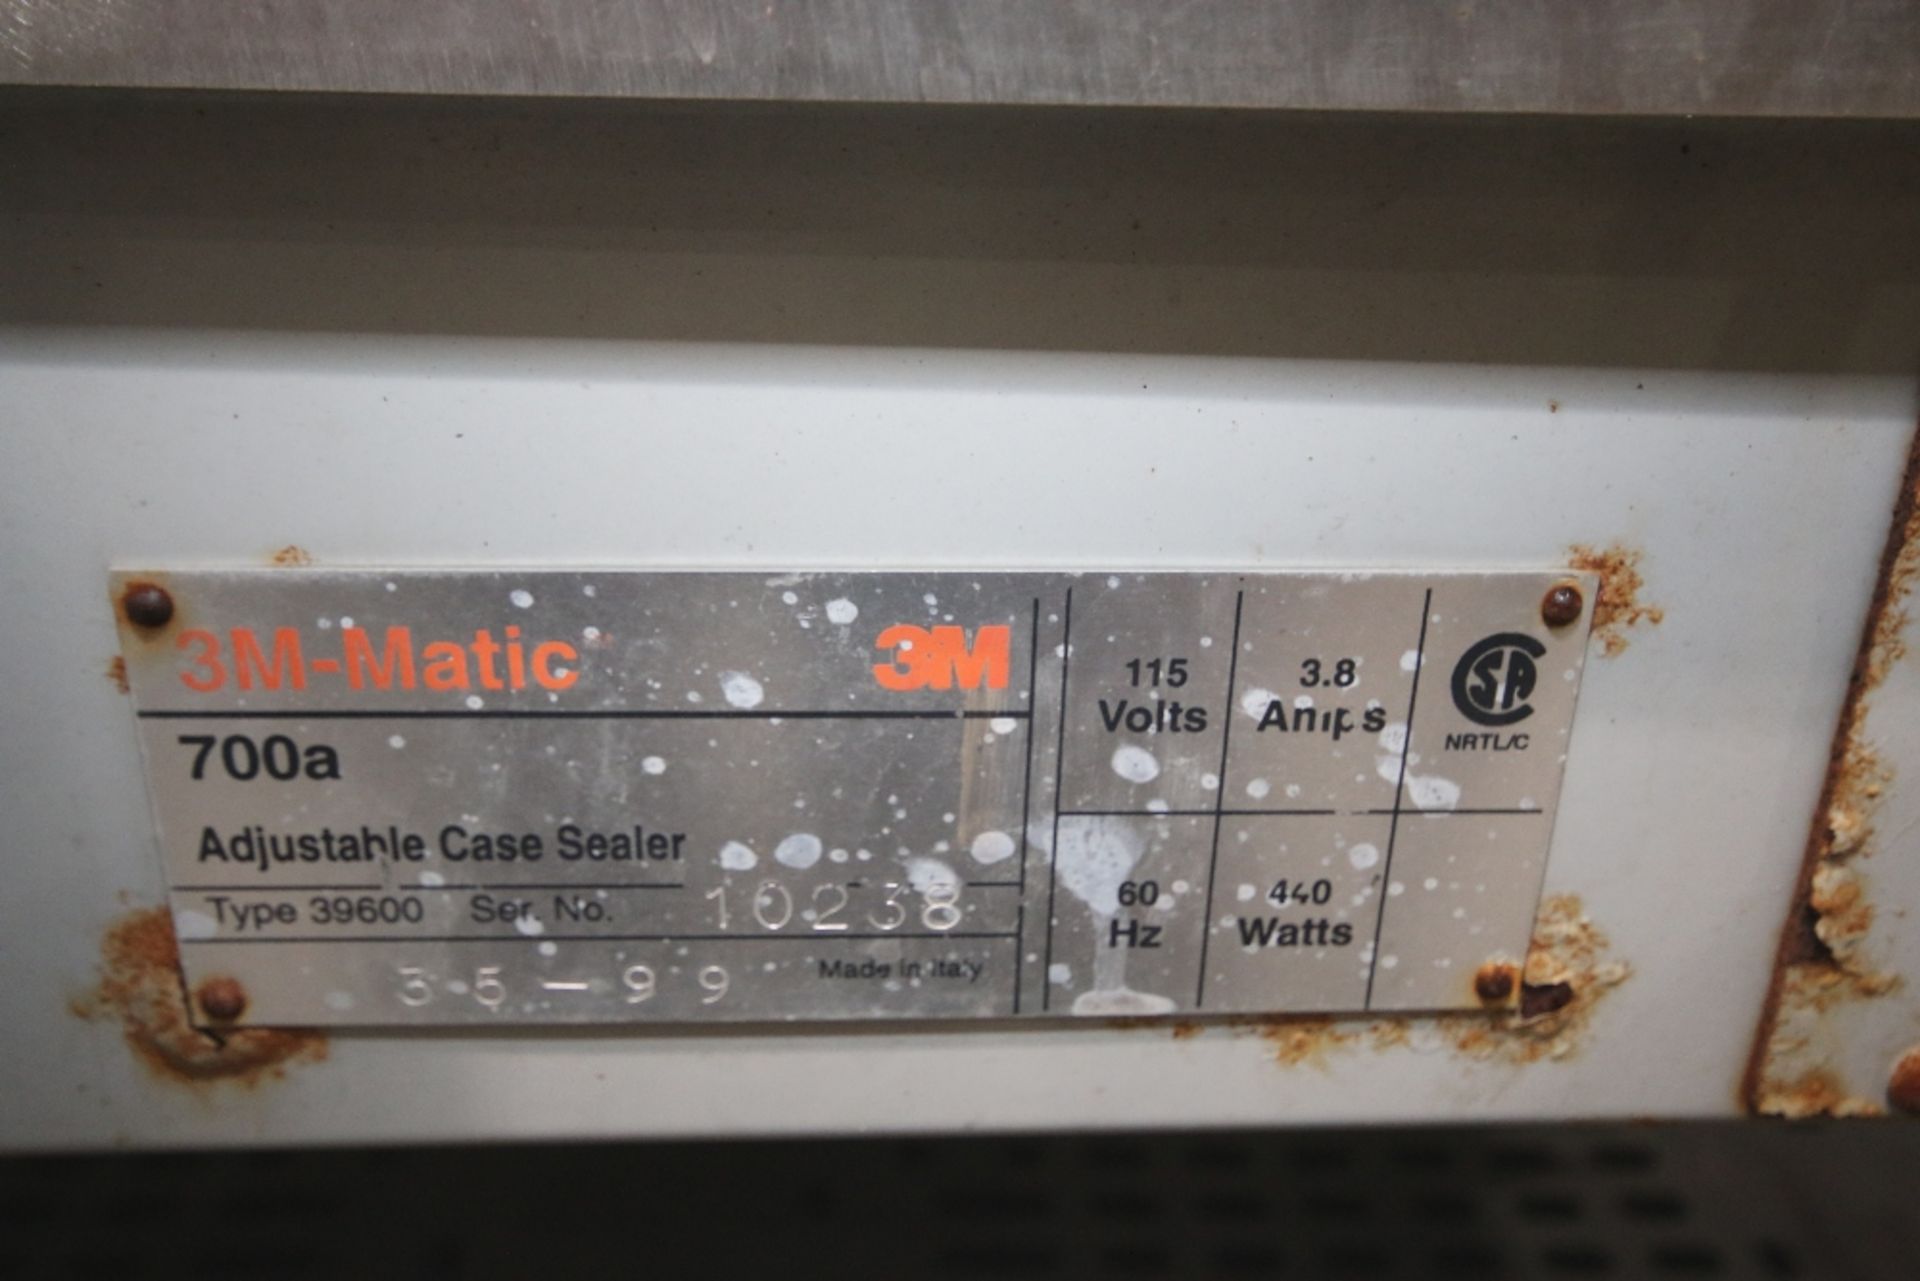 3M-Matic Top and Bottom Adjustable Case Sealer, Model 700A, Type 39600, S/N 10238 with Marsh Union - Image 4 of 4